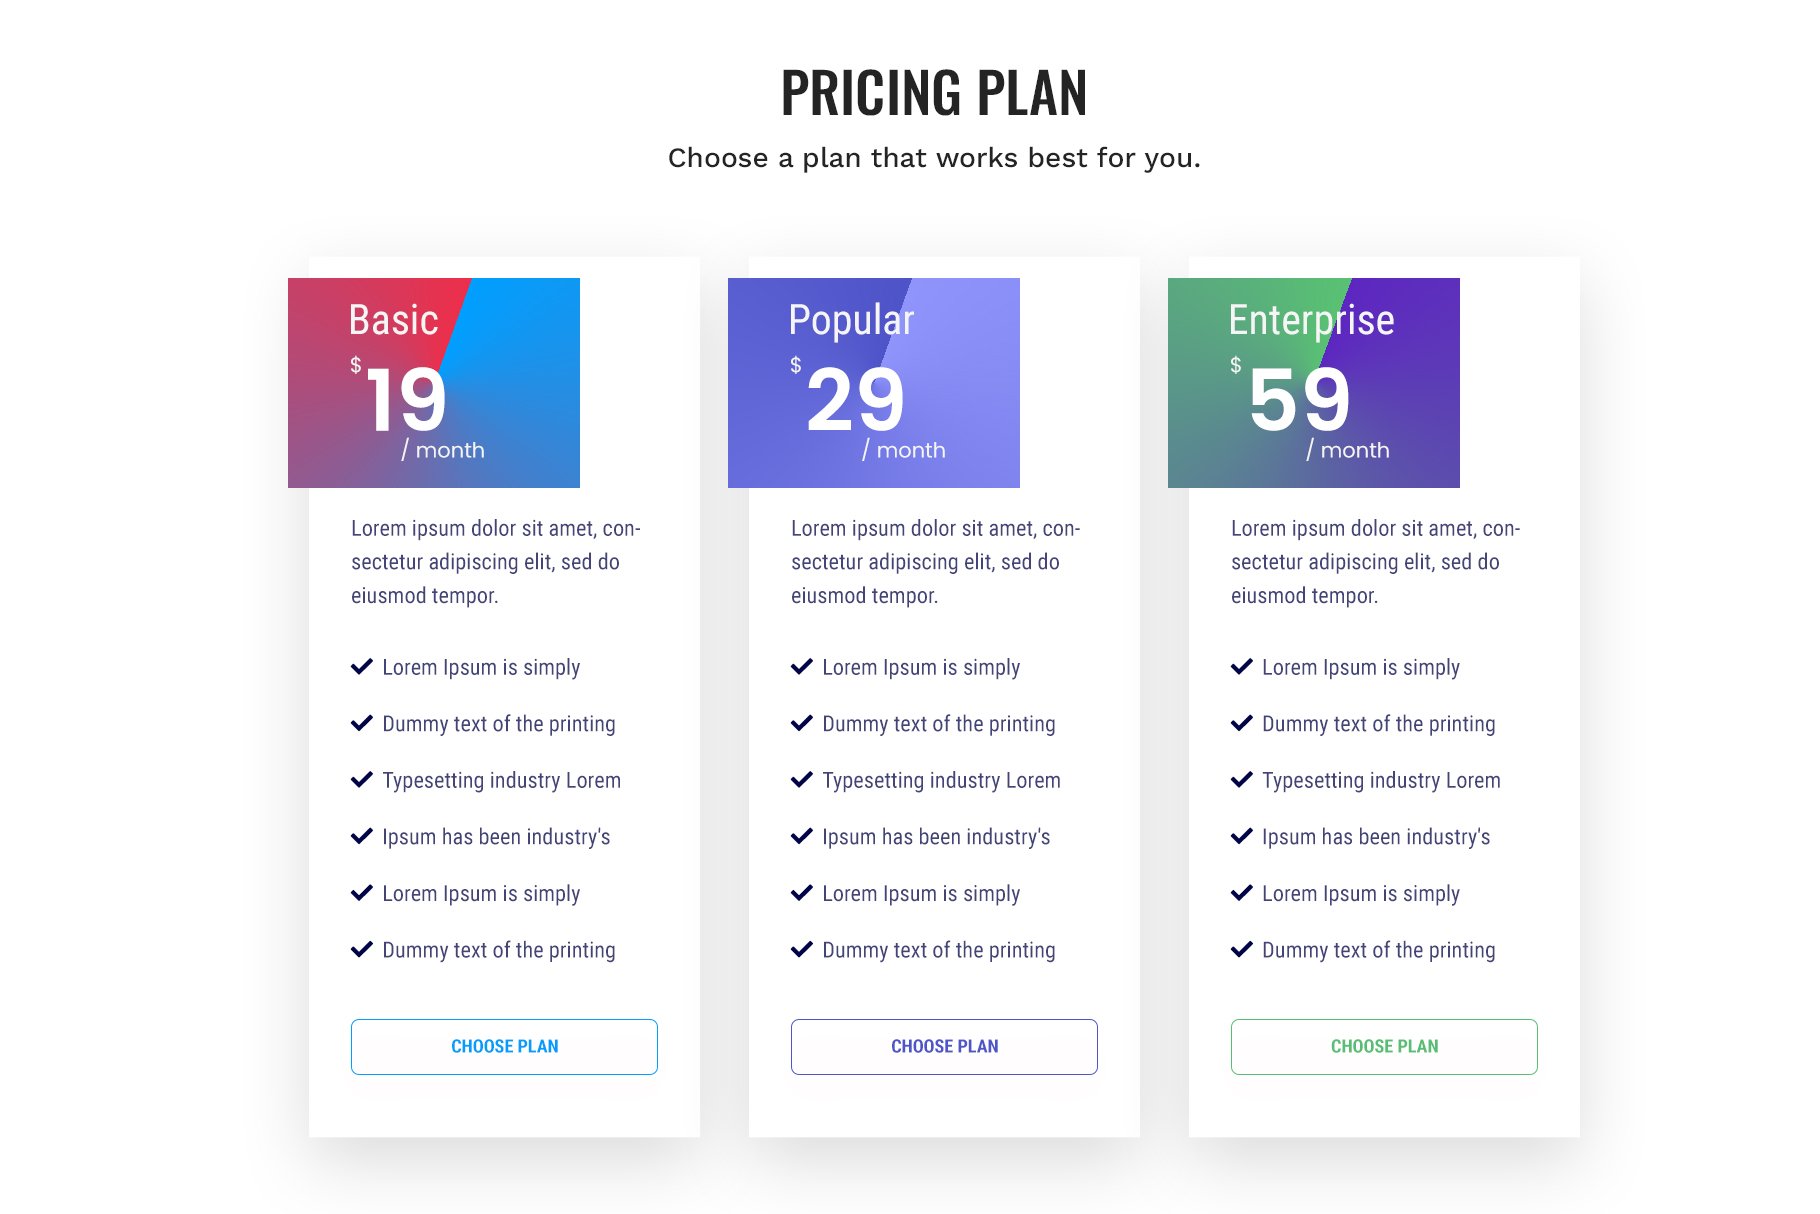 Pricing plan cover image.